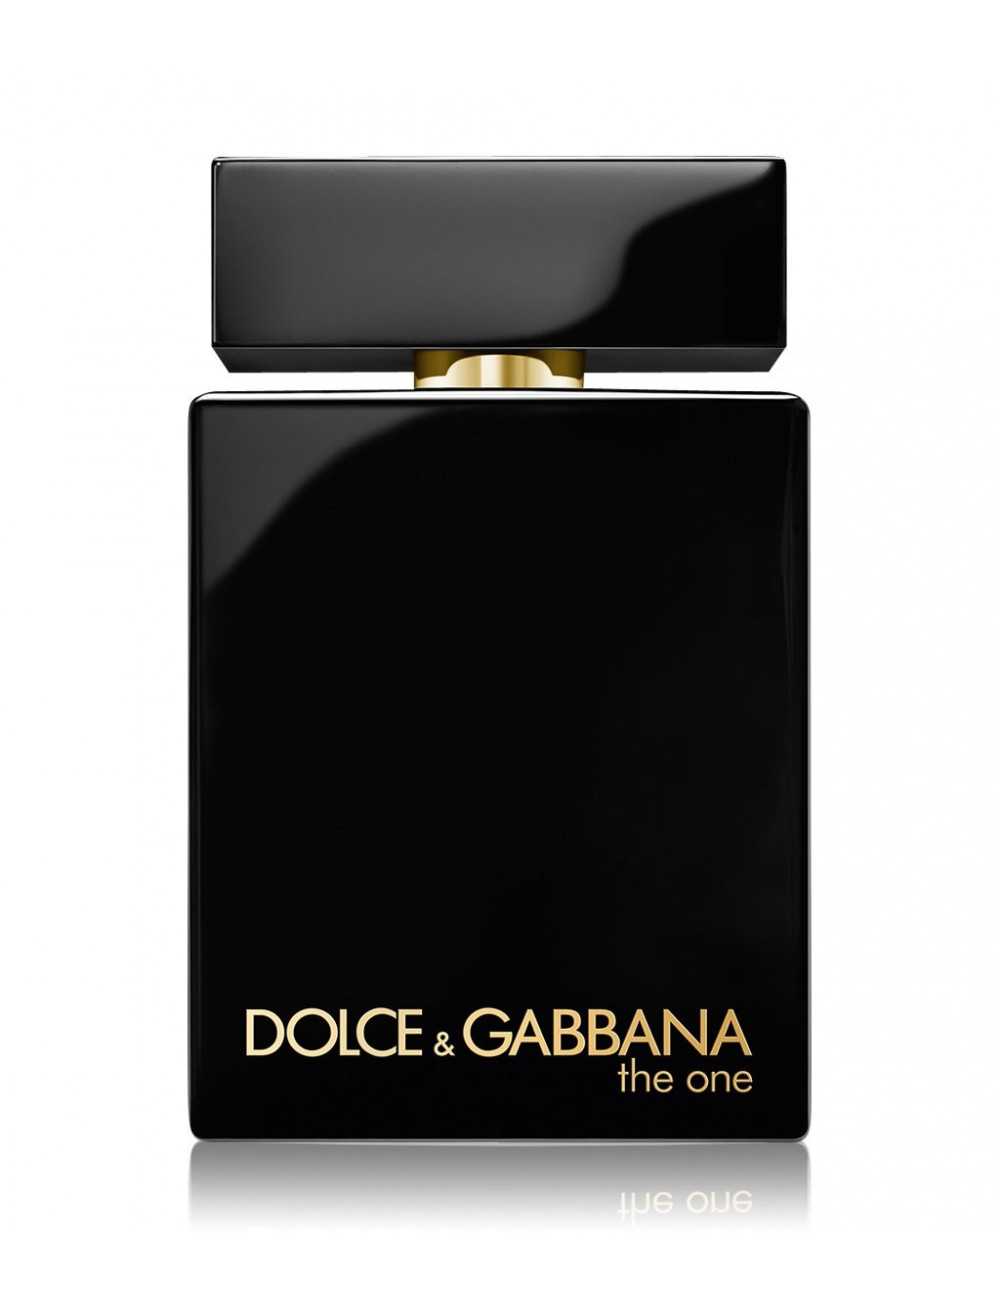 Dolce&Gabbana The One for Him EDP Intense Dolce&Gabbana - rosso.shop